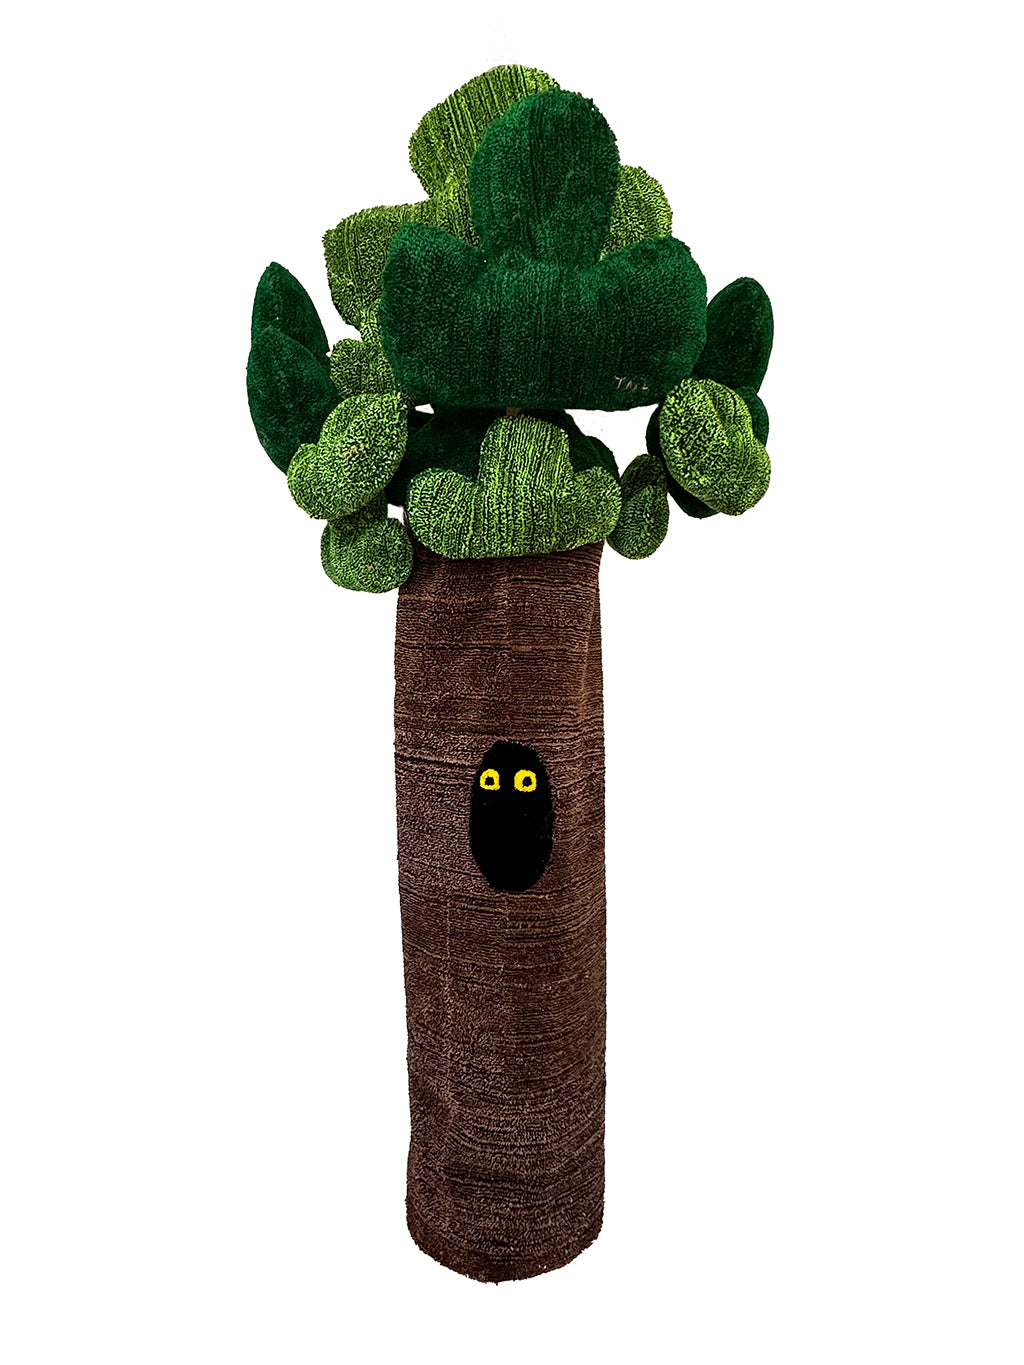 Soft sculpture of a tree with a two yellow eyes coming out of a hole in the trunk.